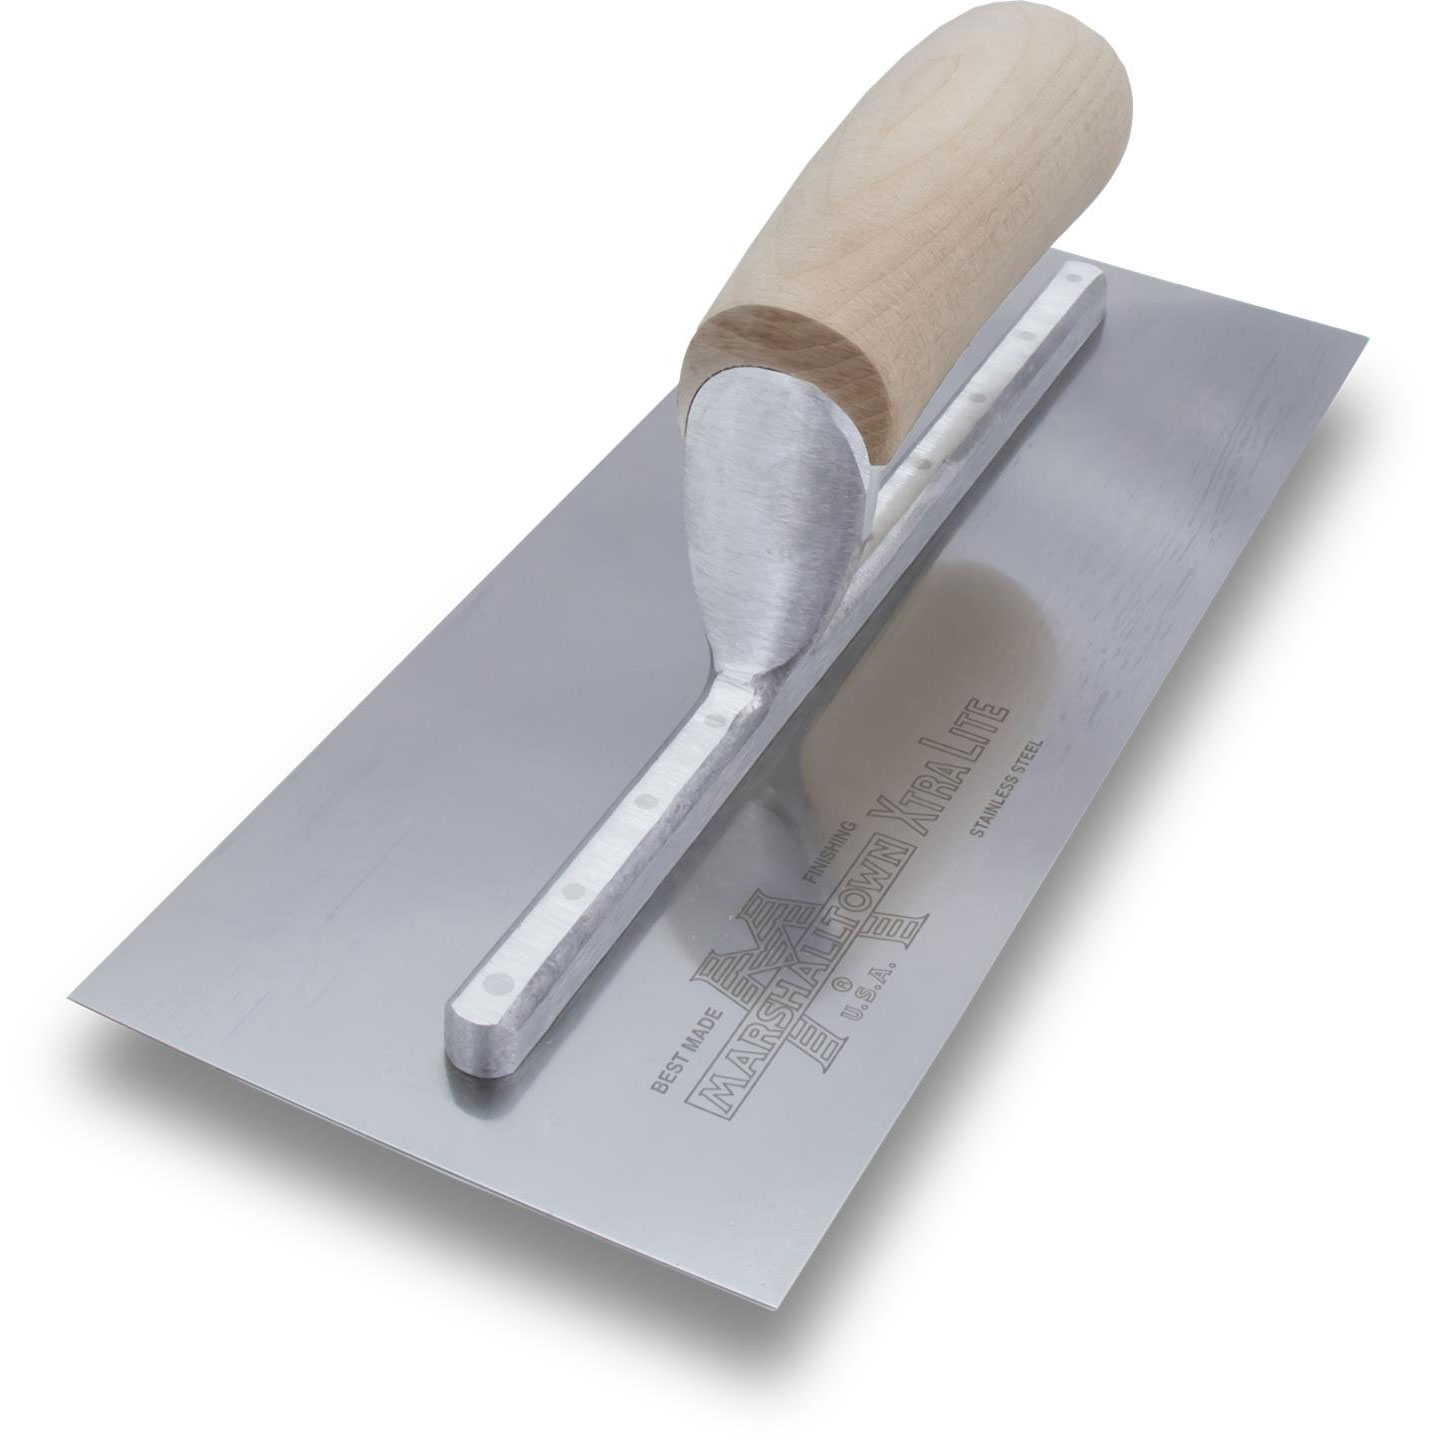 Marshalltown MXS62SS 12in x 4in Stainless Finishing Trowel with Curved Wood Handle MXS62SS